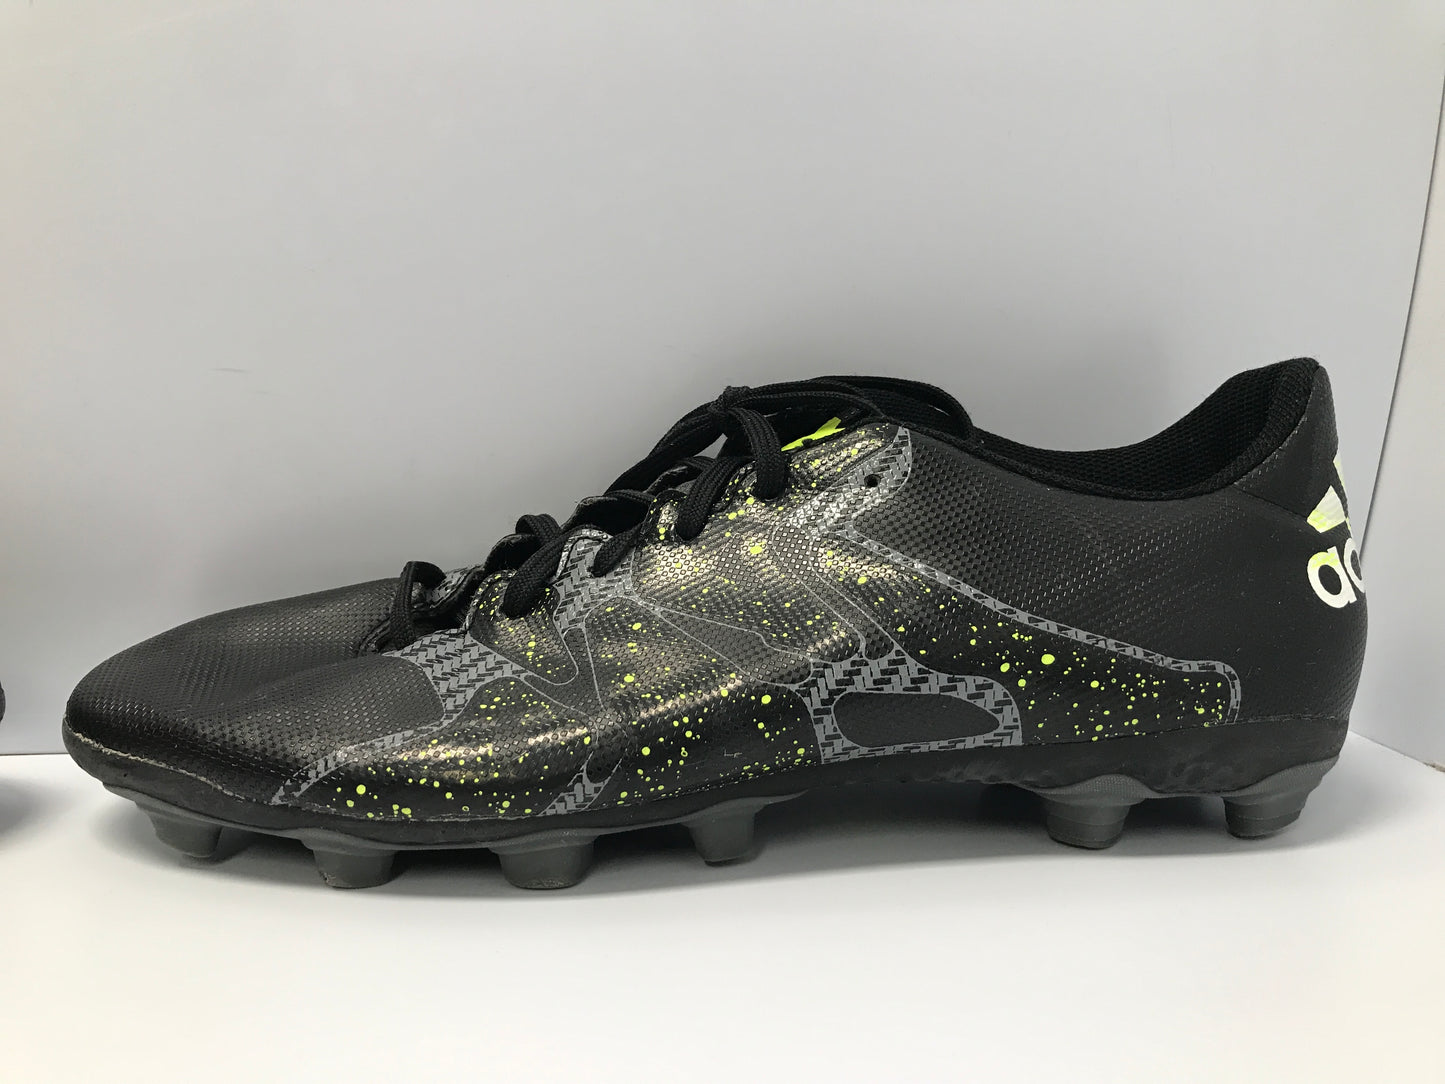 Soccer Shoes Cleats Men's Size 9 Adidas Black Lime Grey